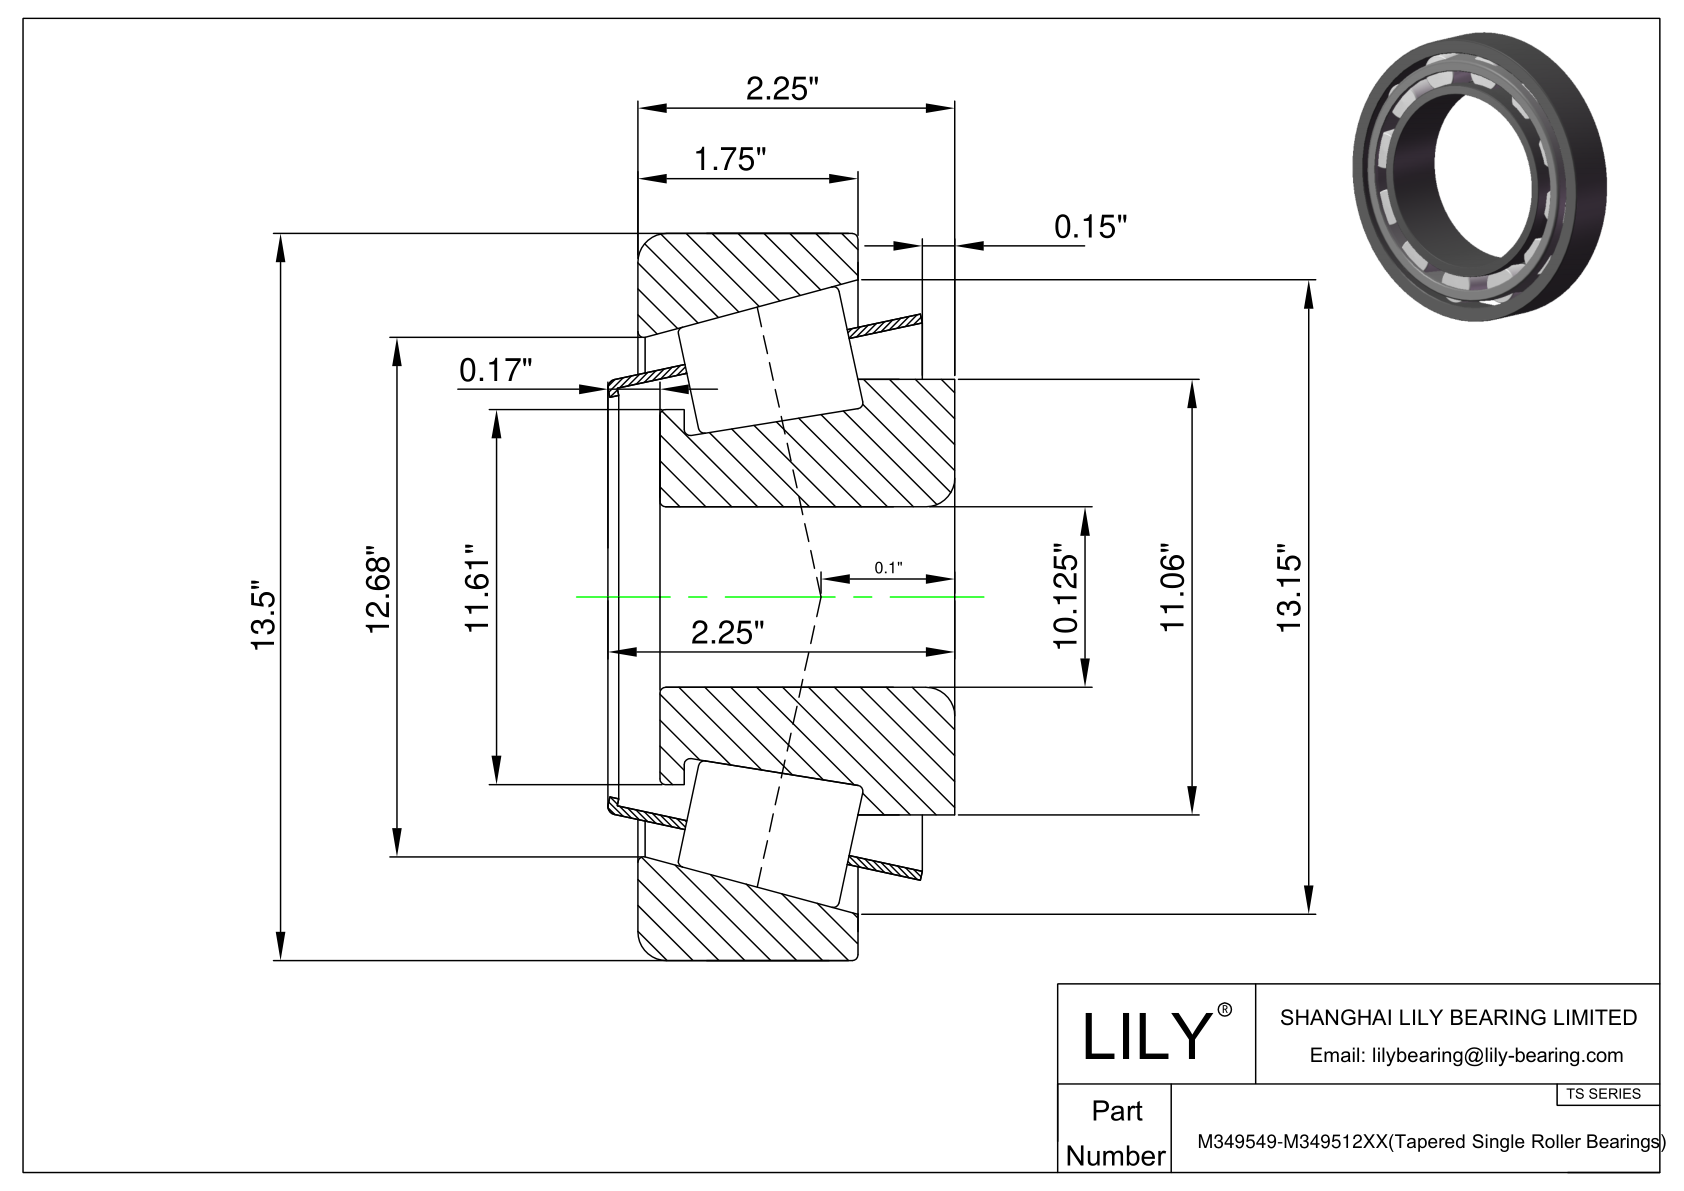 M349549-M349512XX TS (Tapered Single Roller Bearings) (Imperial) cad drawing